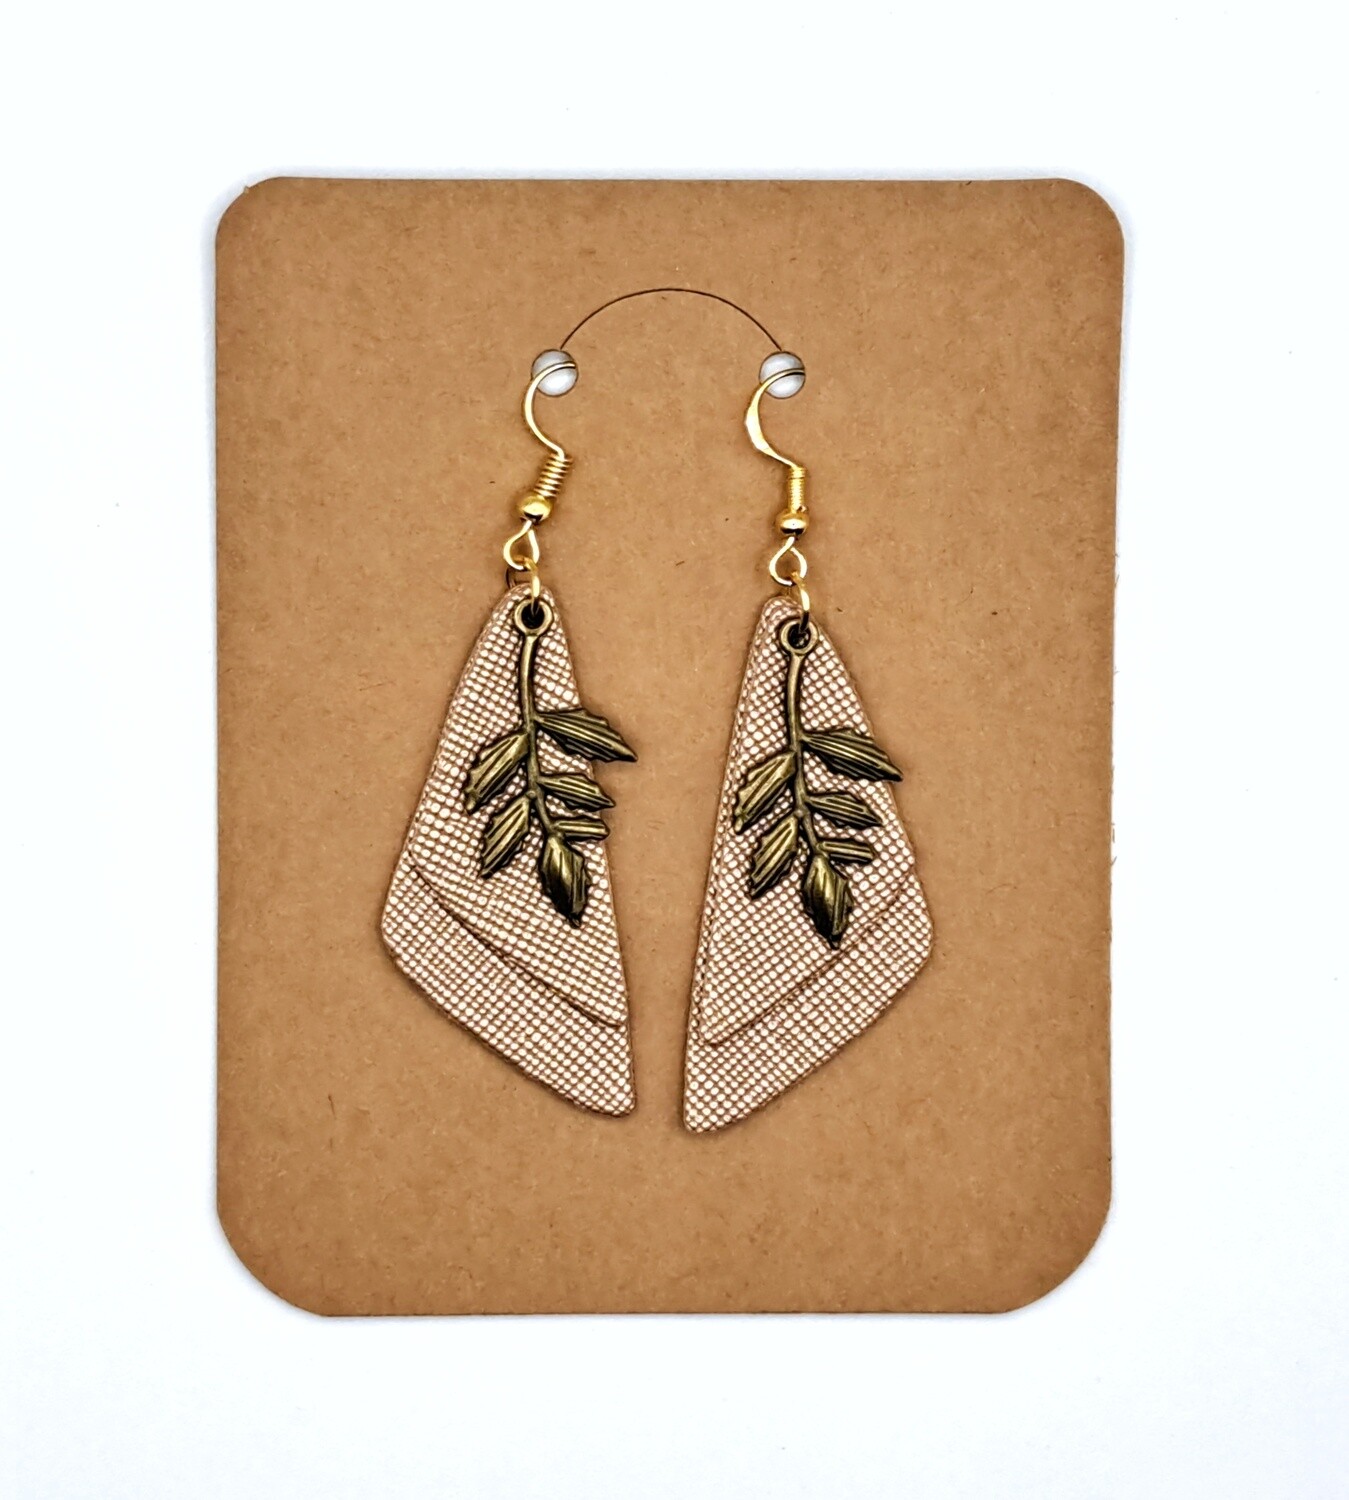 Handmade Asymmetric Layered Faux Leather with Antique Bronze Leaves Charms Earrings